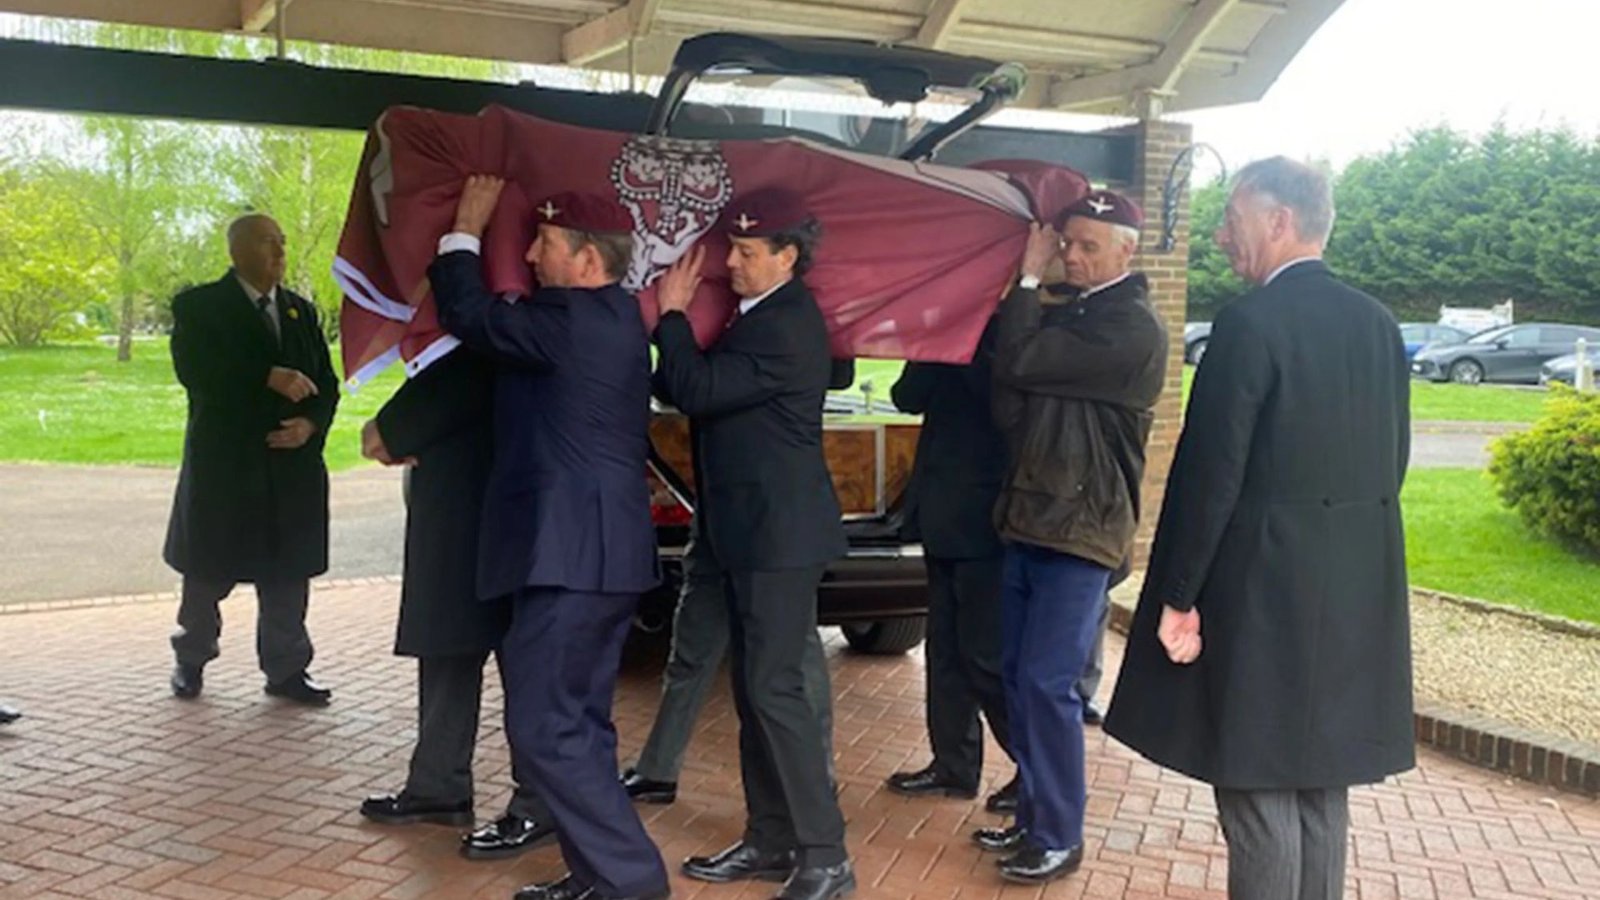 Incredible moment war veterans turn out at funeral of paratrooper who died with no family – thanks to Facebook appeal